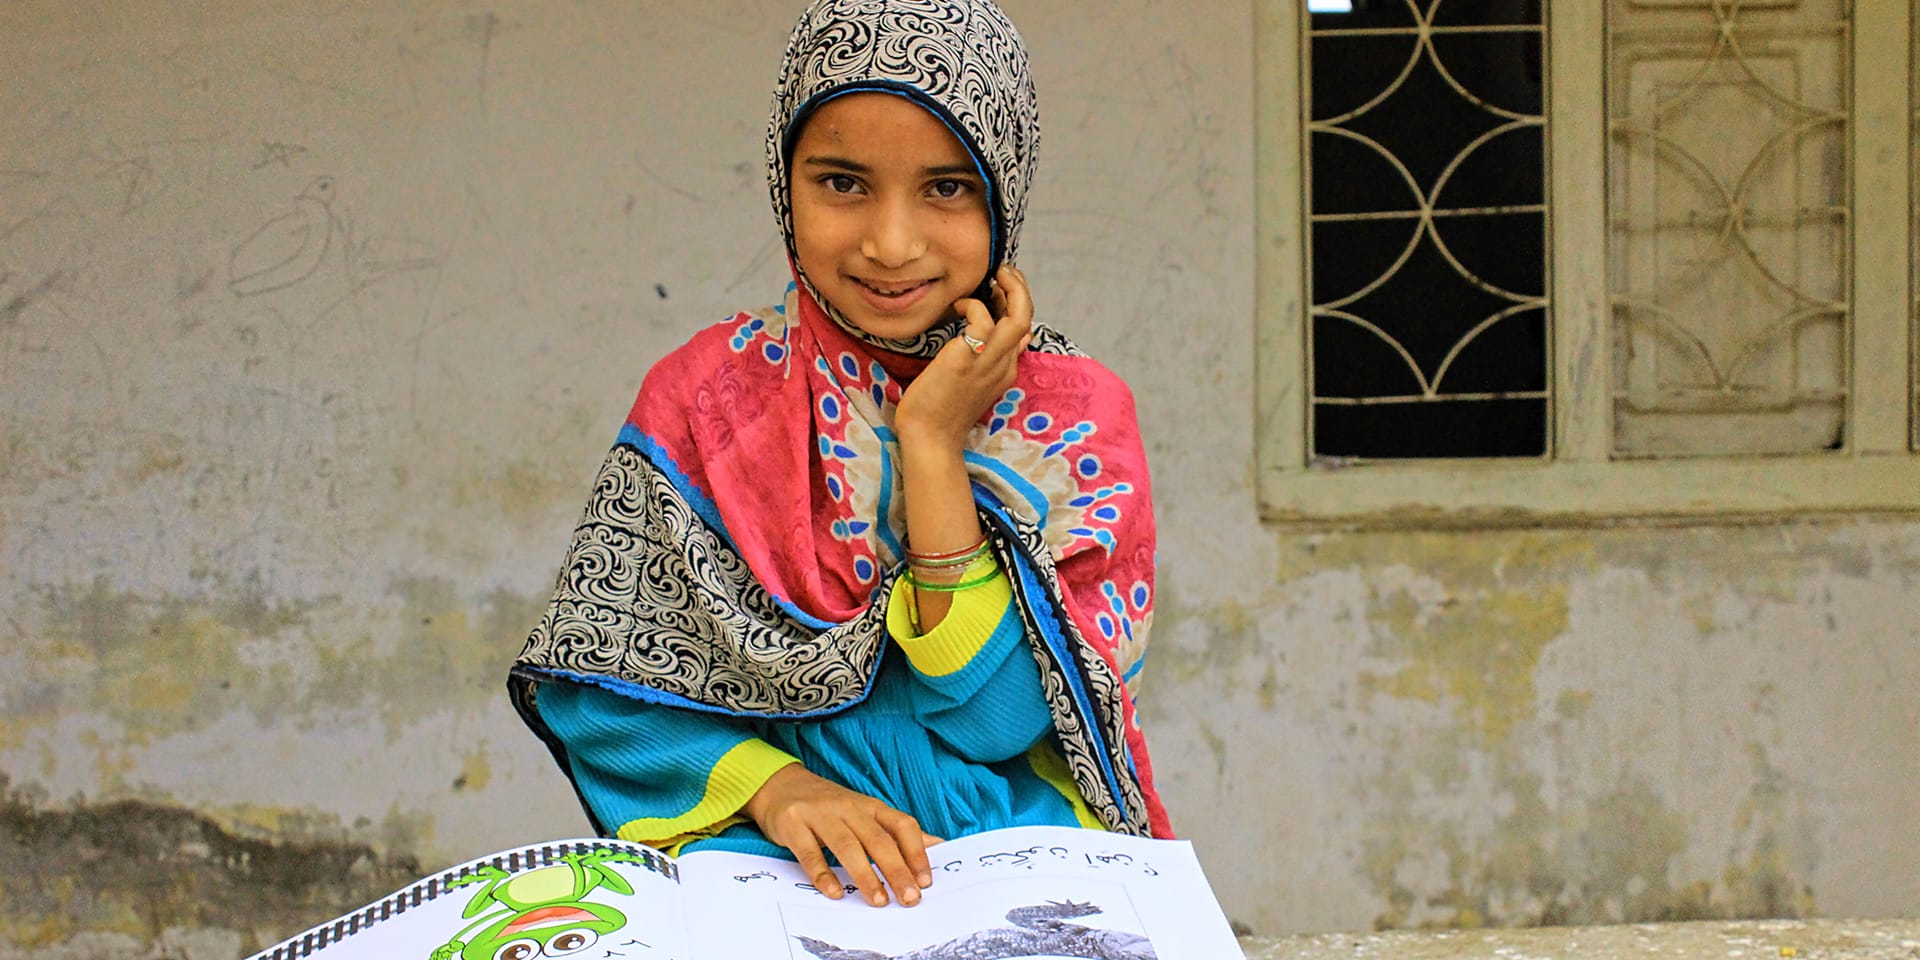 A smiling girl sitting in front of a home and reading from a children's book.